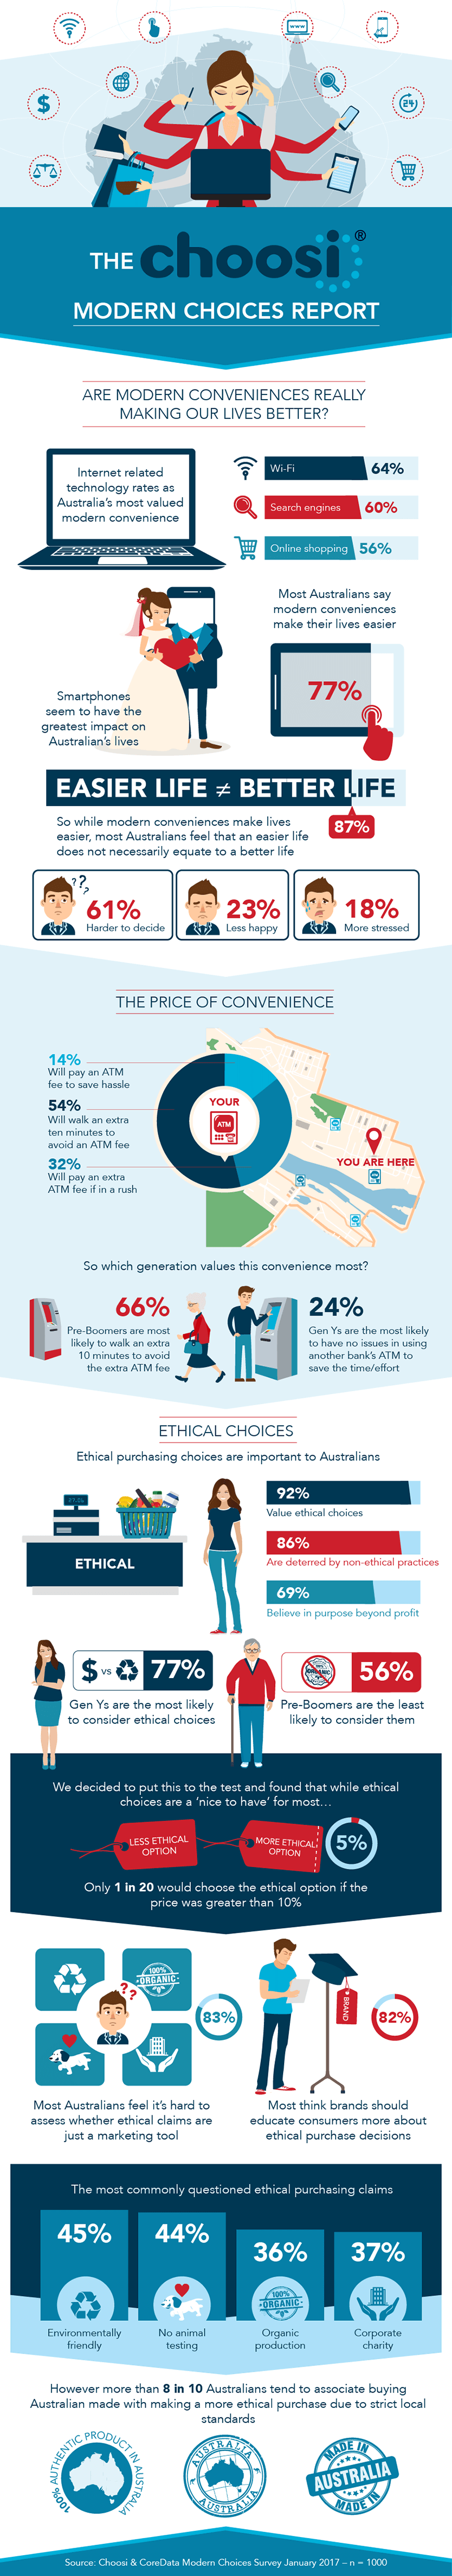 The Choosi modern choices infographic